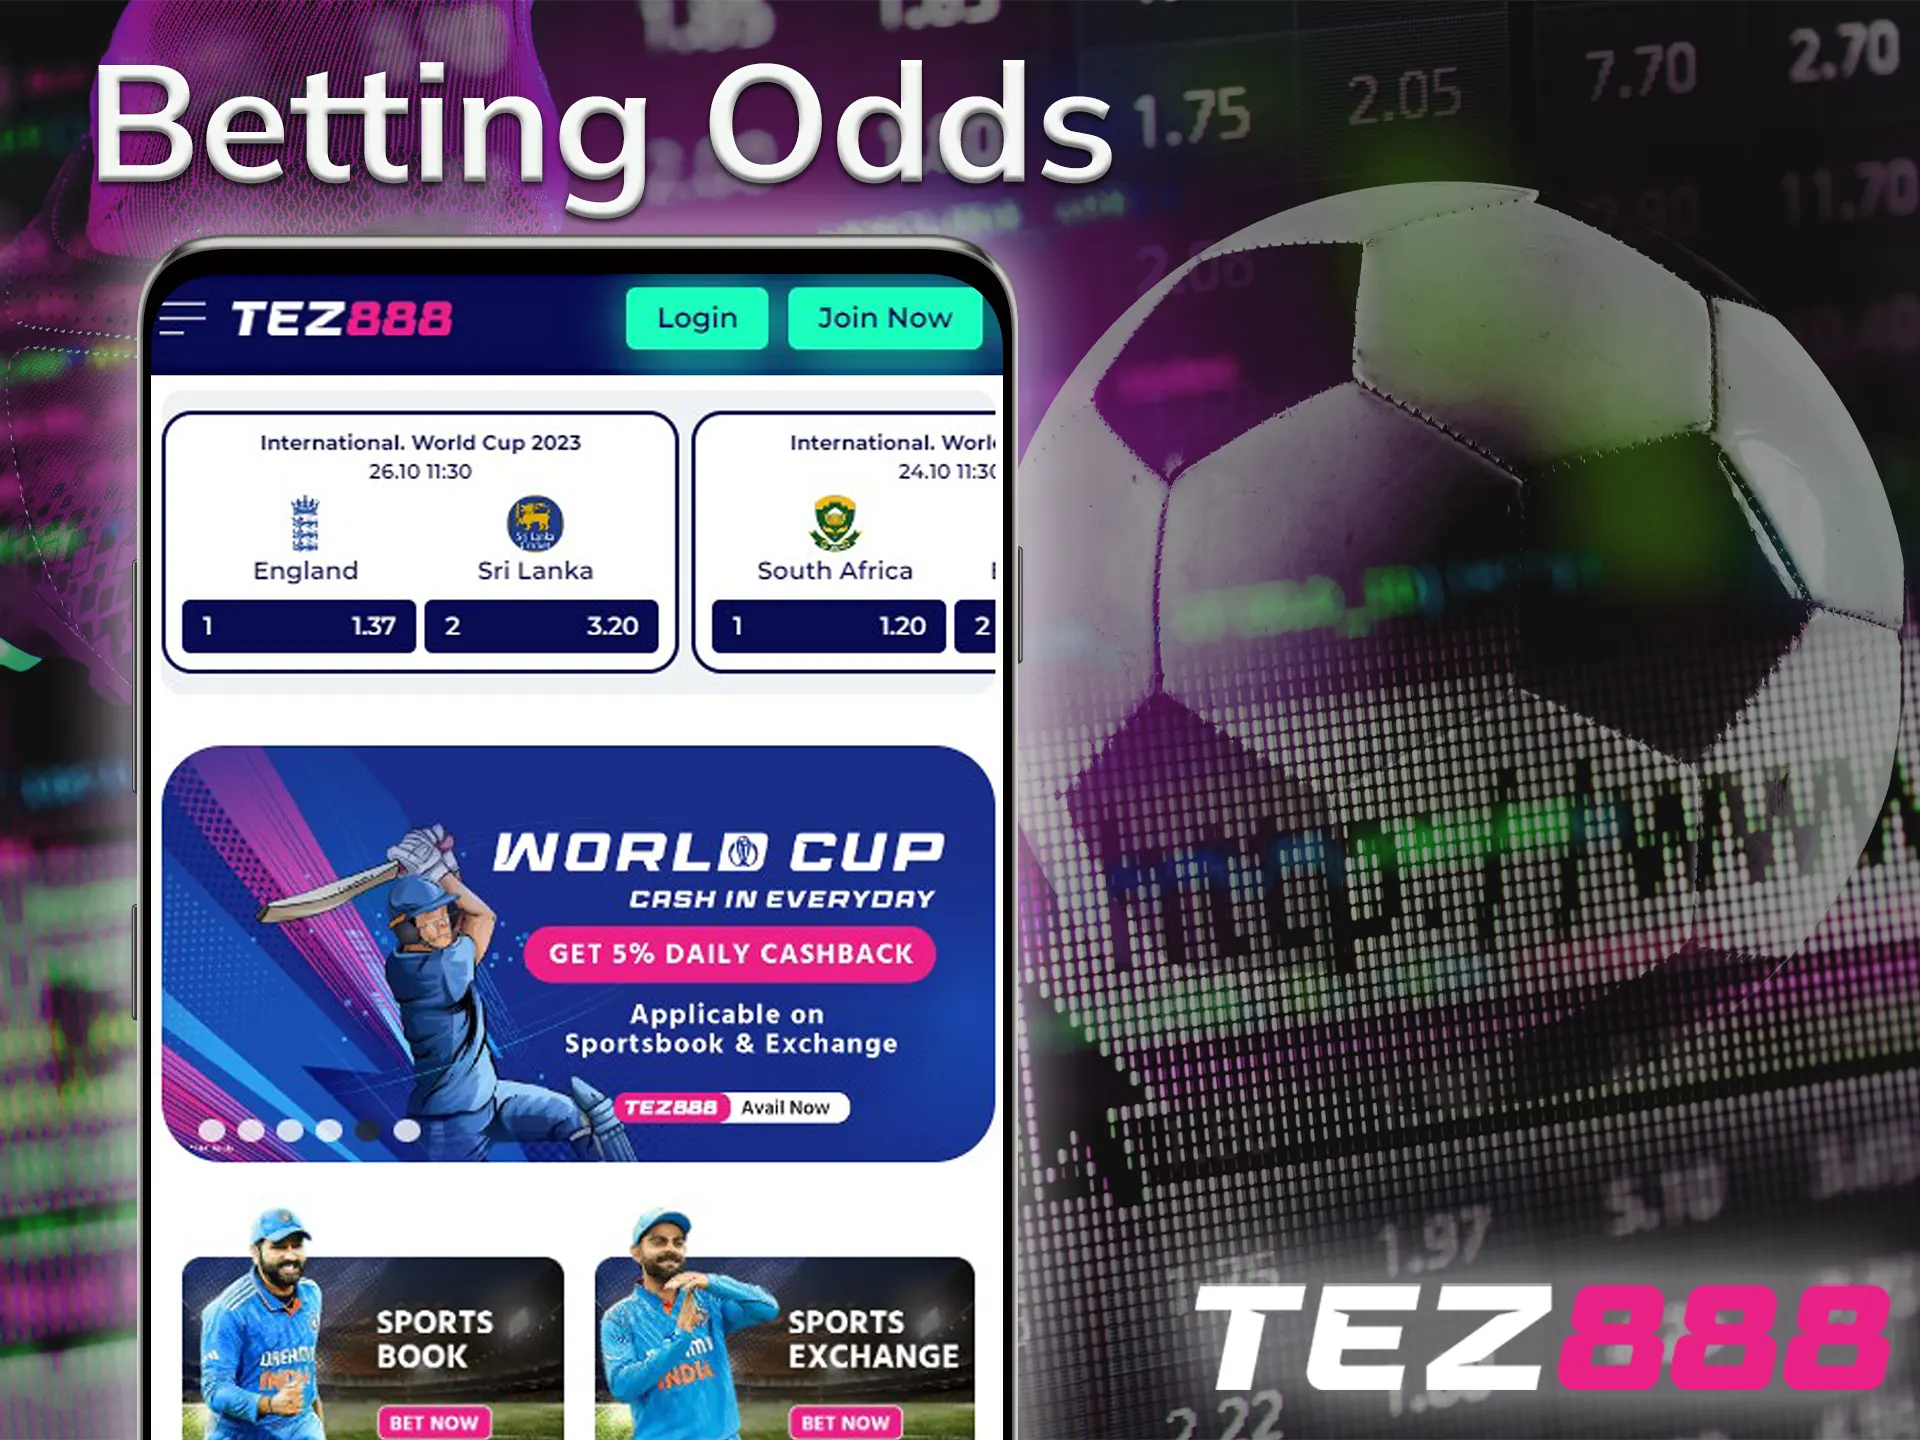 The higher the odds, the more money you can win at tez888.